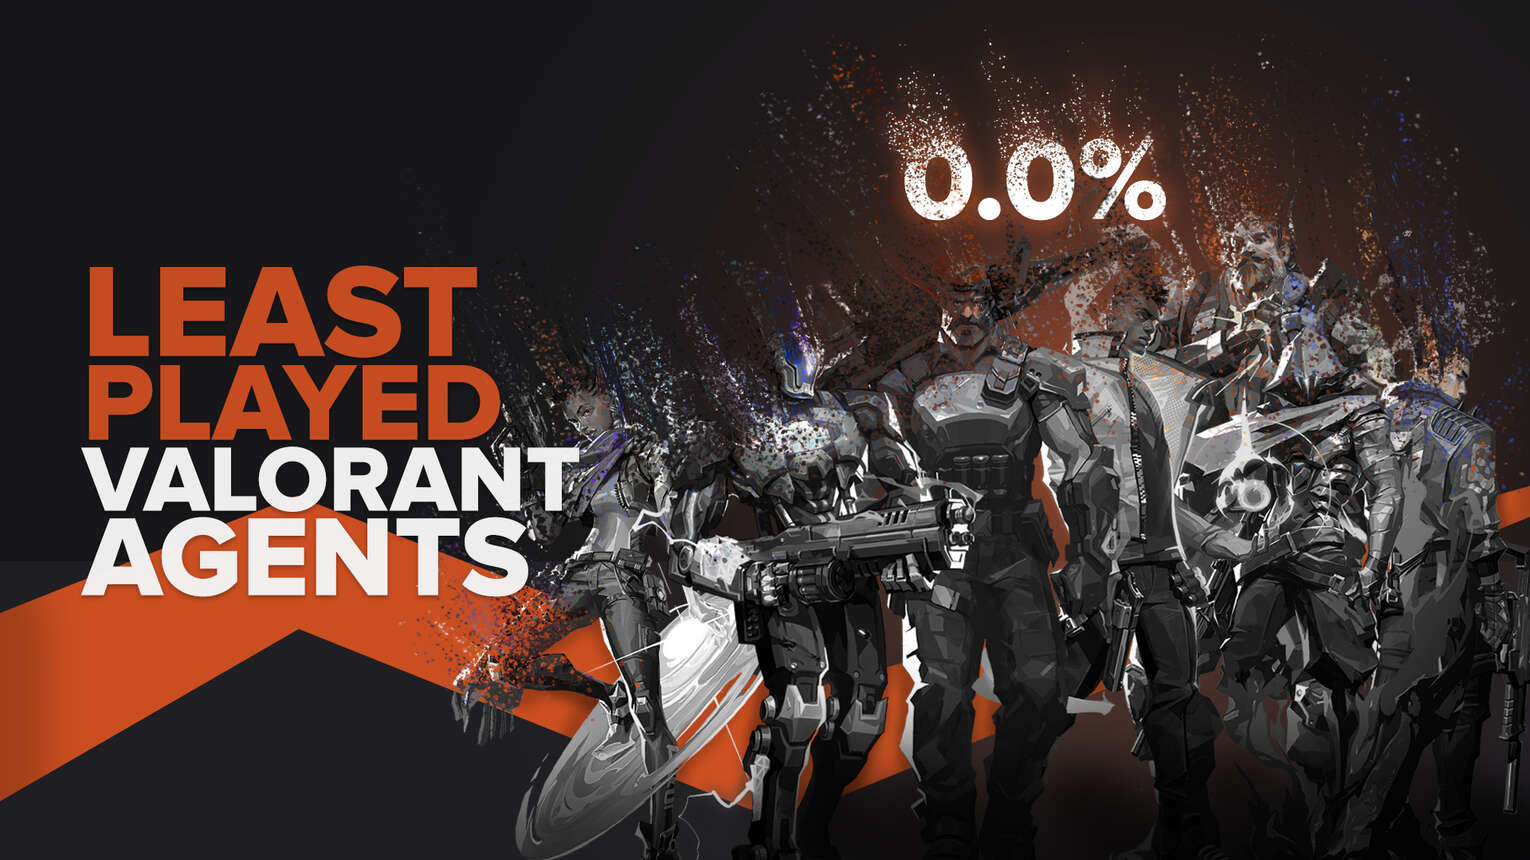 Least Played Valorant Agents